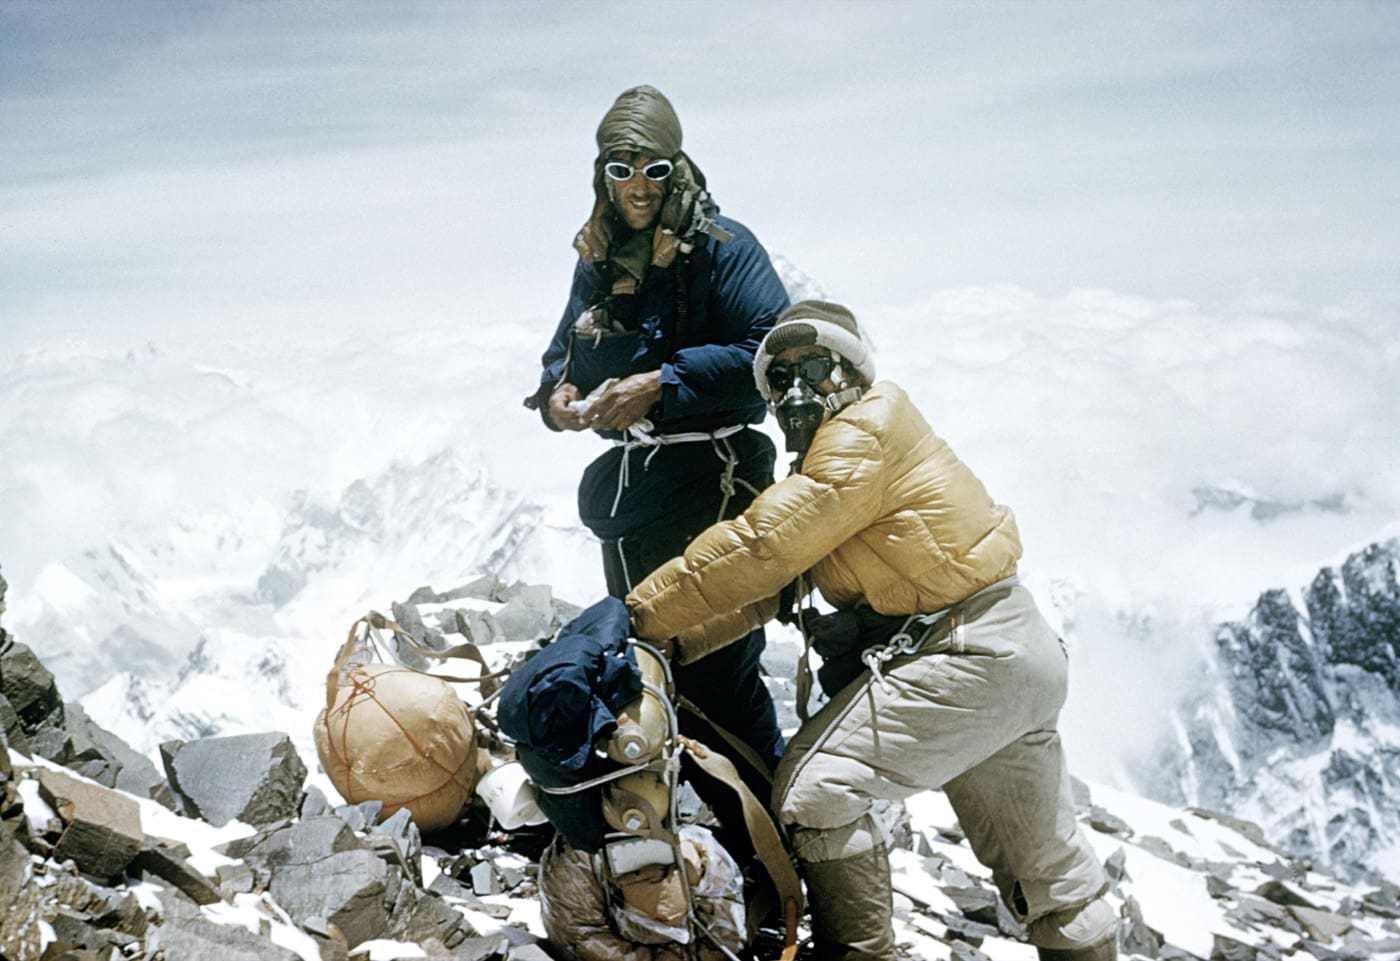 Edmund Hillary and Tensing Norgay on Everest, 1953